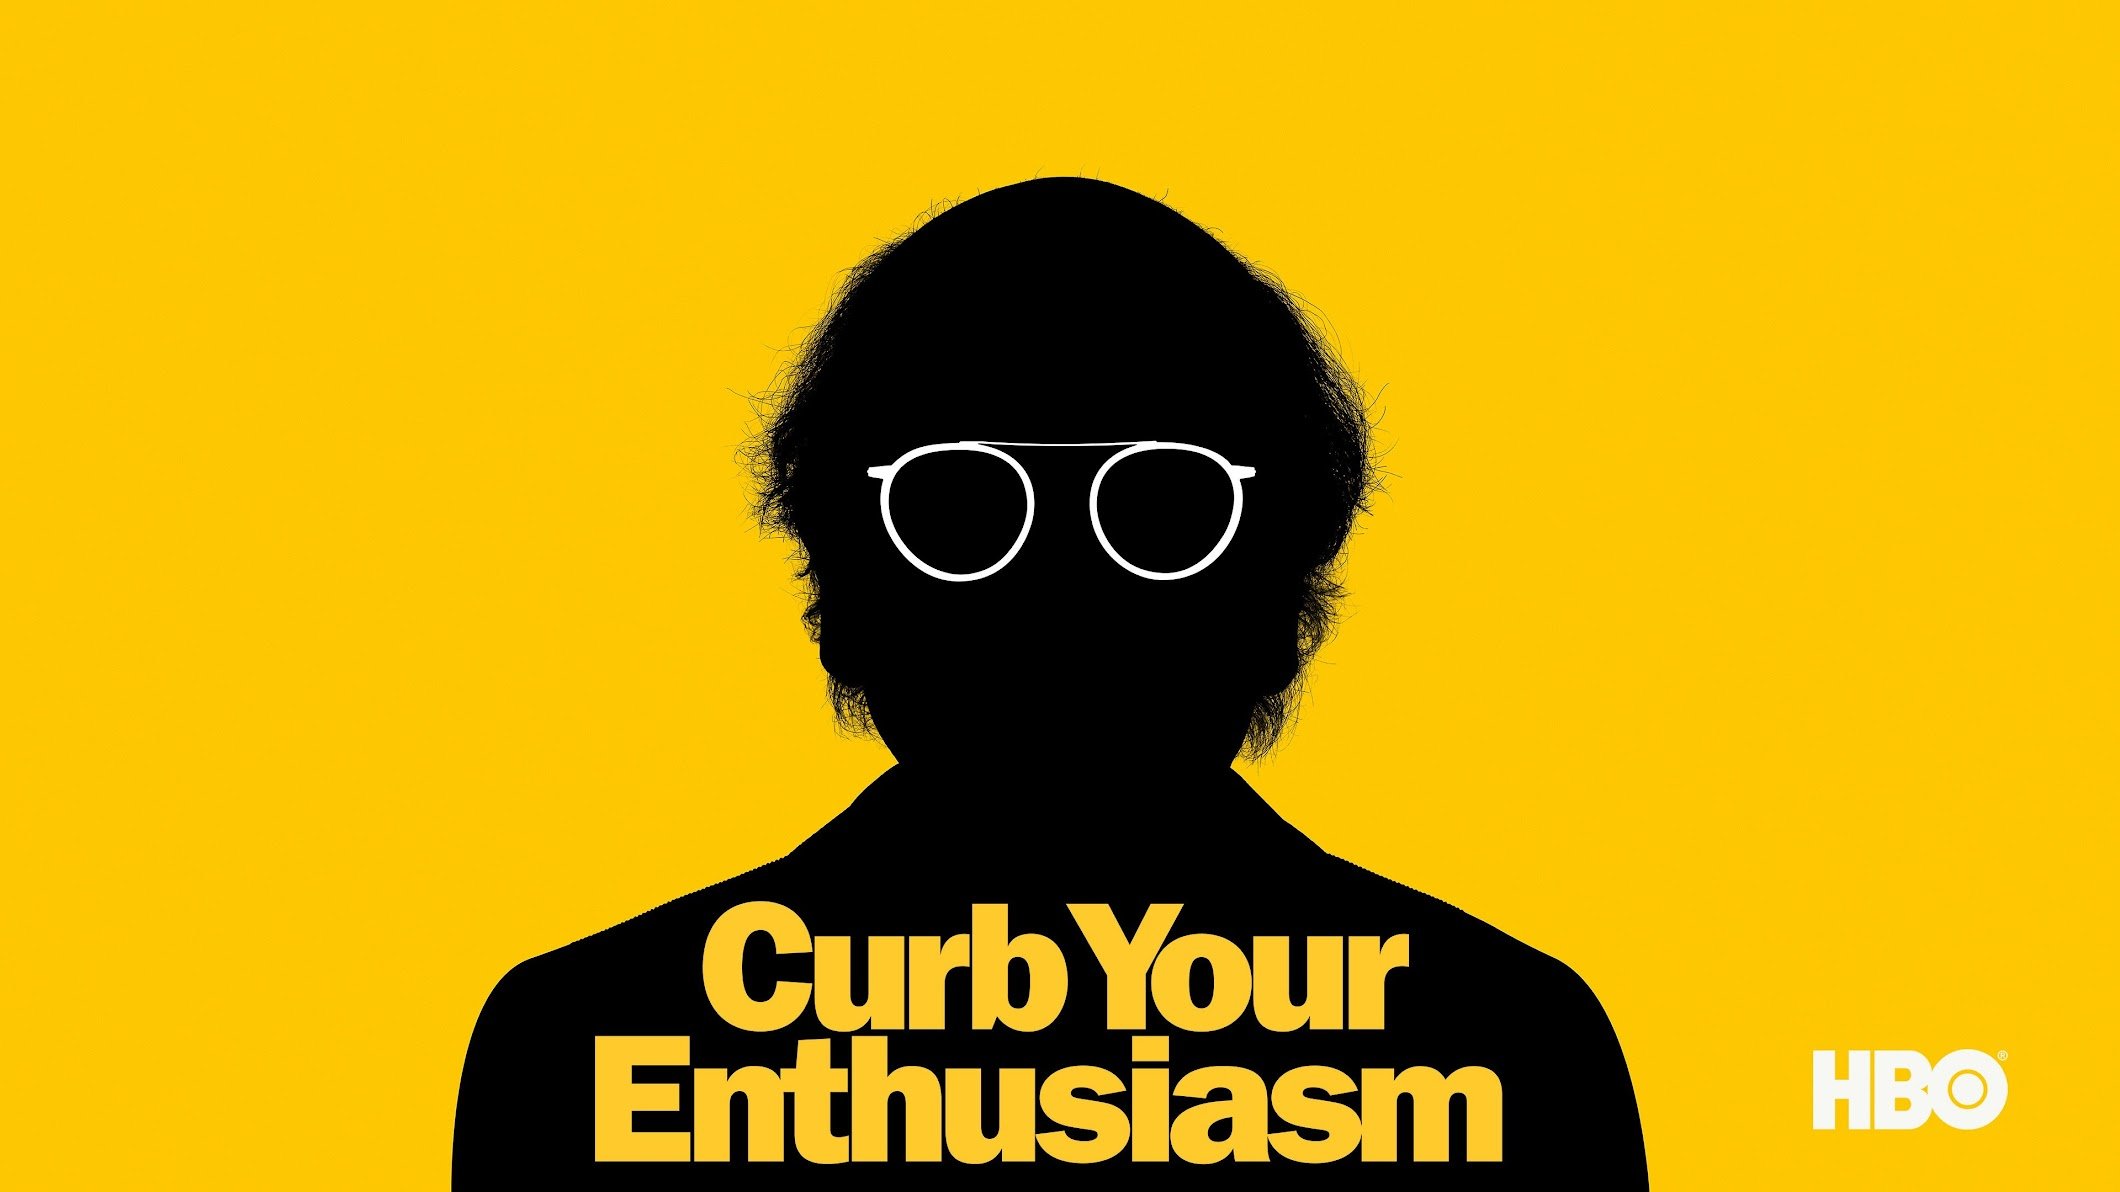 CURB YOUR ENTHUSIASM TV SHOW FEATURED OUR LED LIGHTING PRODUCTS WHILE ...